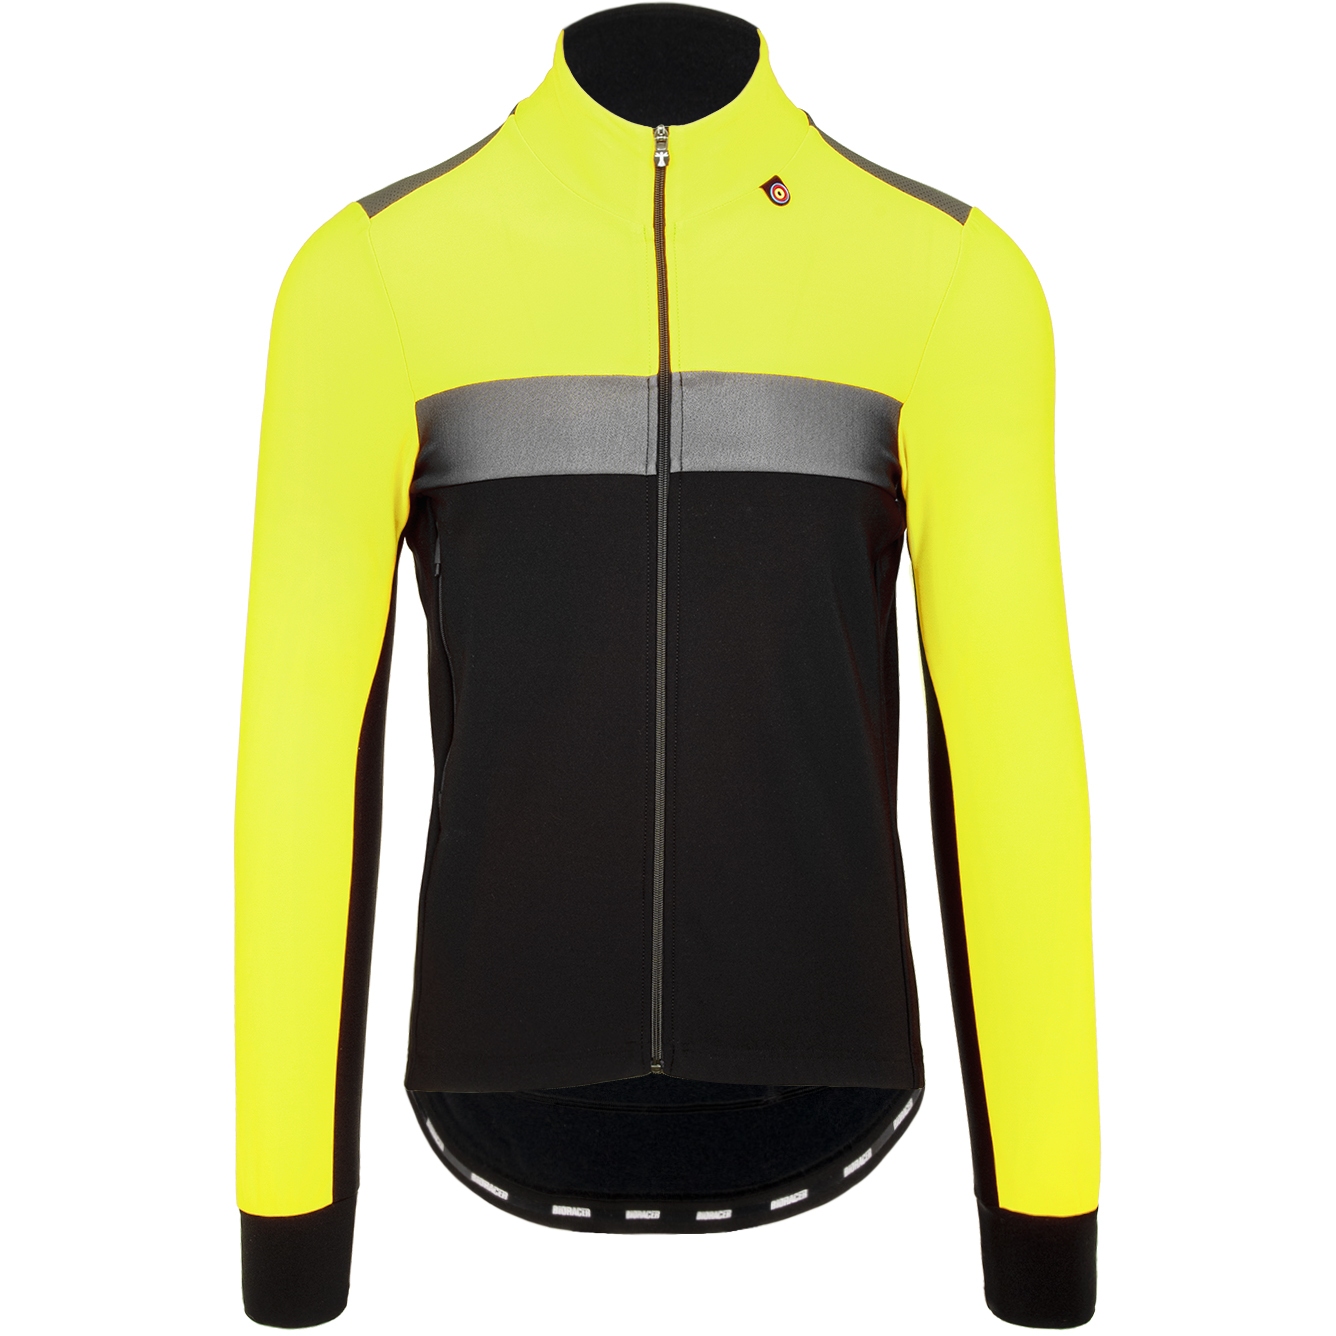 Picture of Bioracer Spitfire Tempest Spring Jacket Fluo - fluo yellow